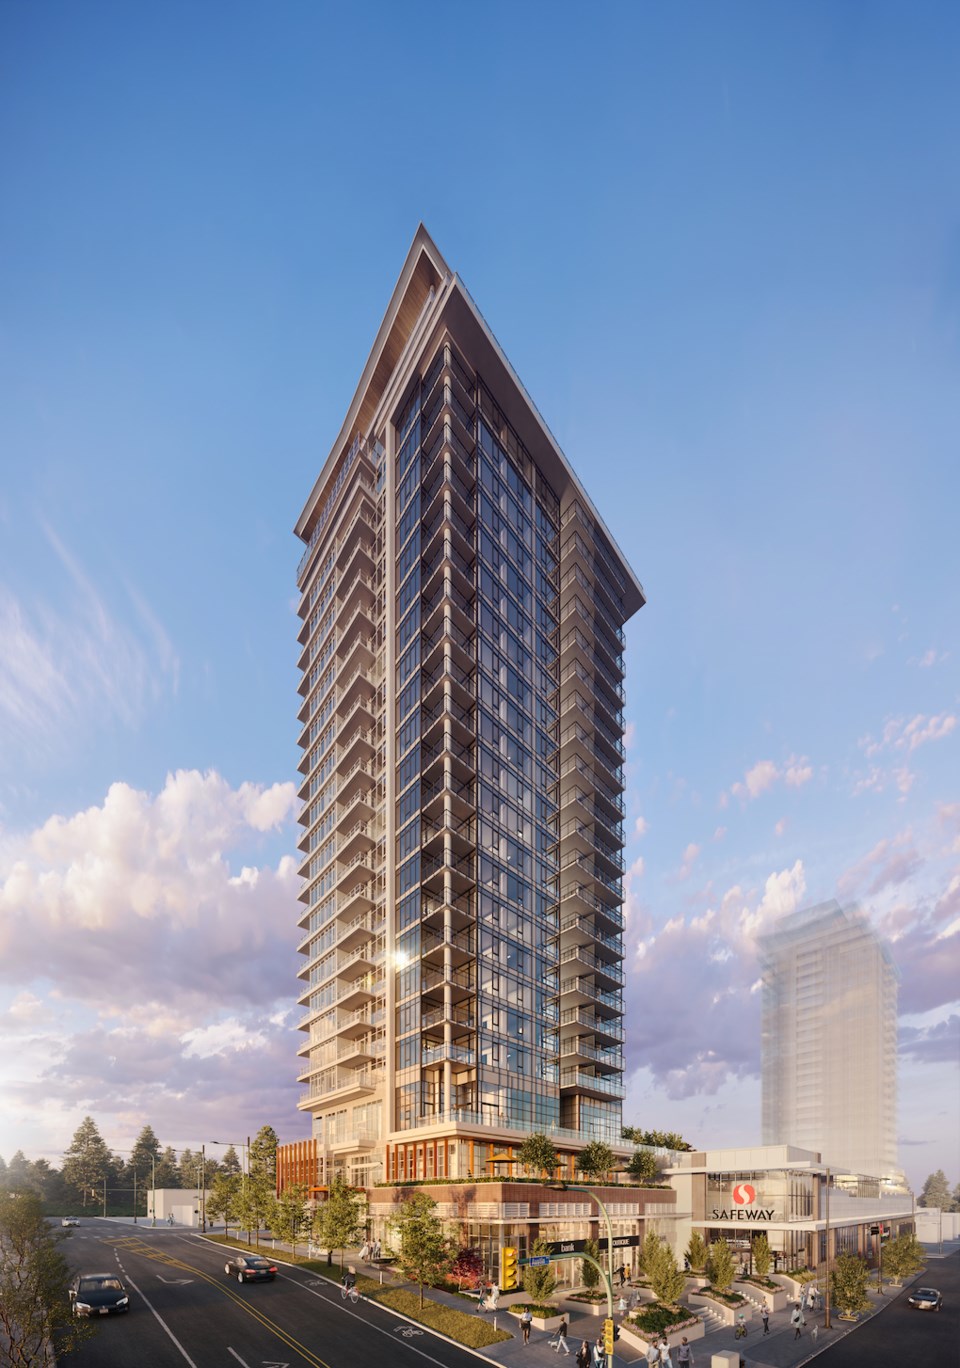 Beedie Living's West condo tower in Coquitlam. |Submitted